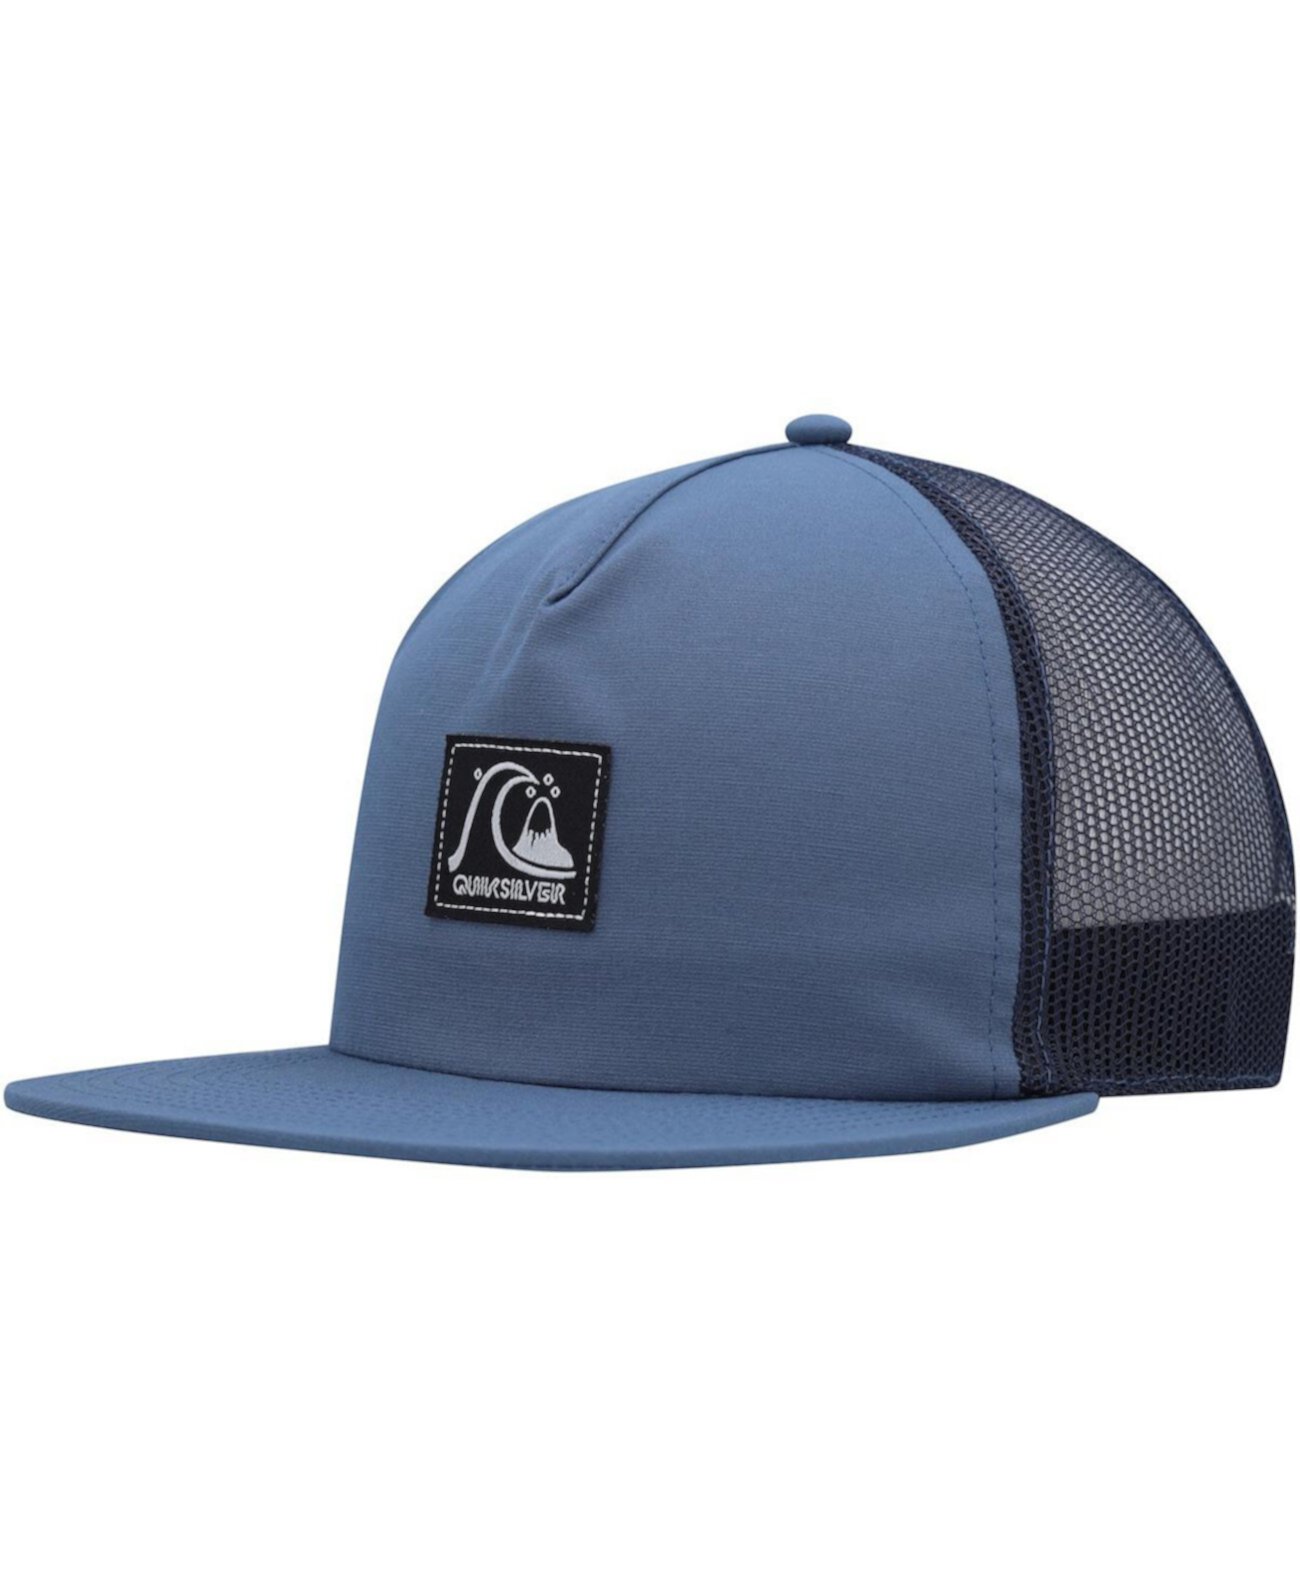 Men's Blue Checked Out Snapback Hat Quiksilver